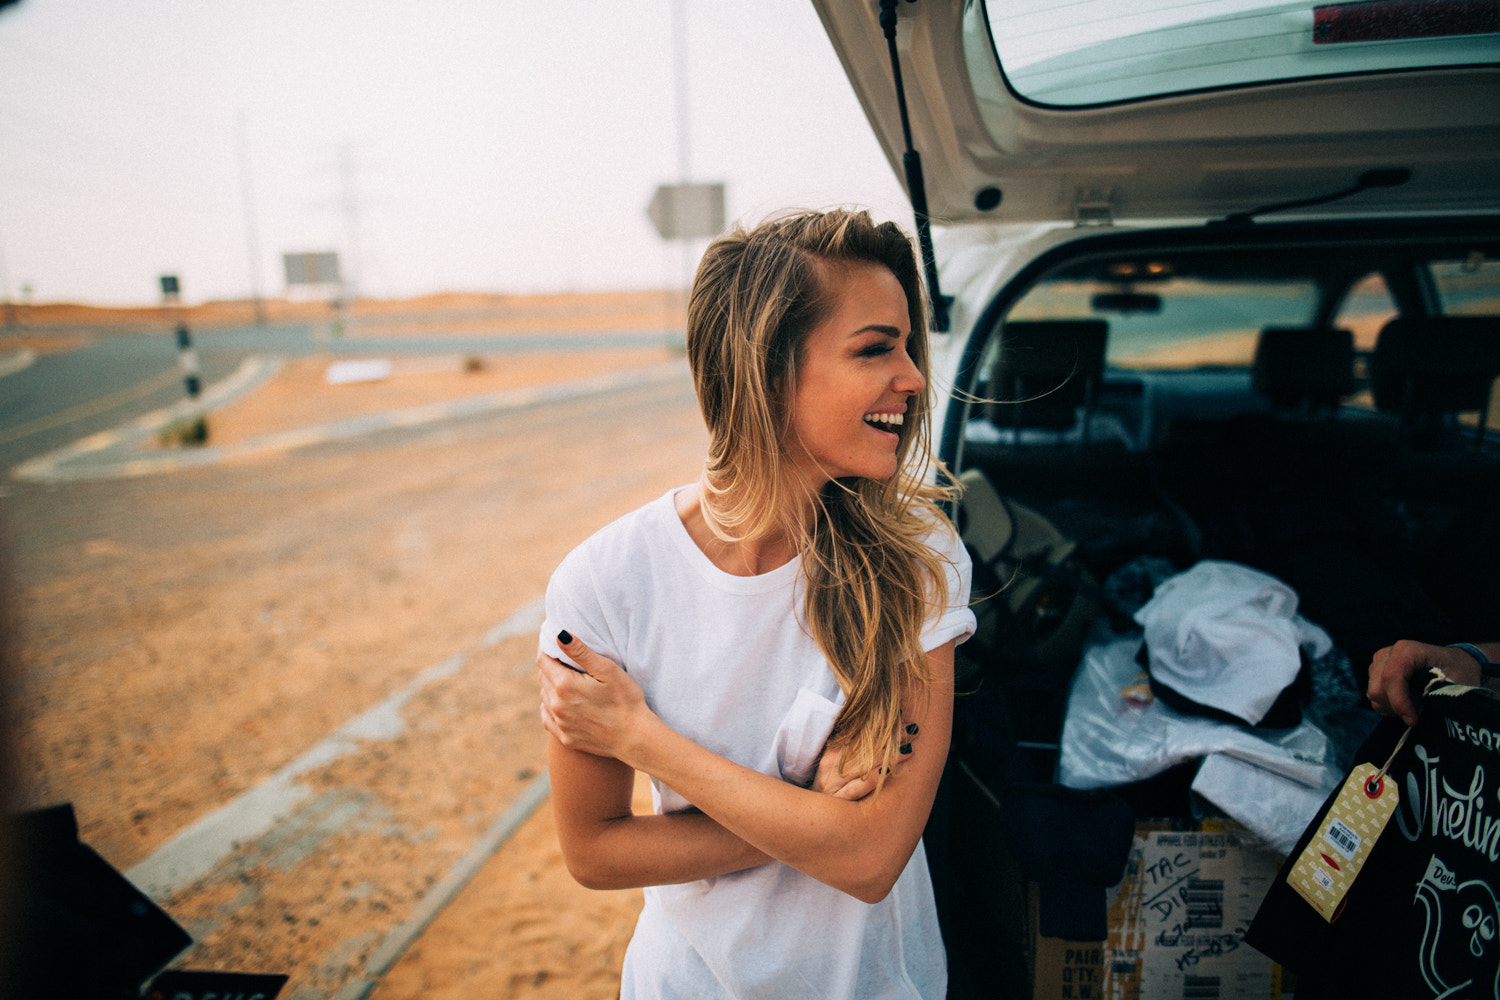 Women Blonde Smiling Black Nails Andre Josselin Laughing Arms Crossed Long Hair Women With Cars Dept 1500x1000